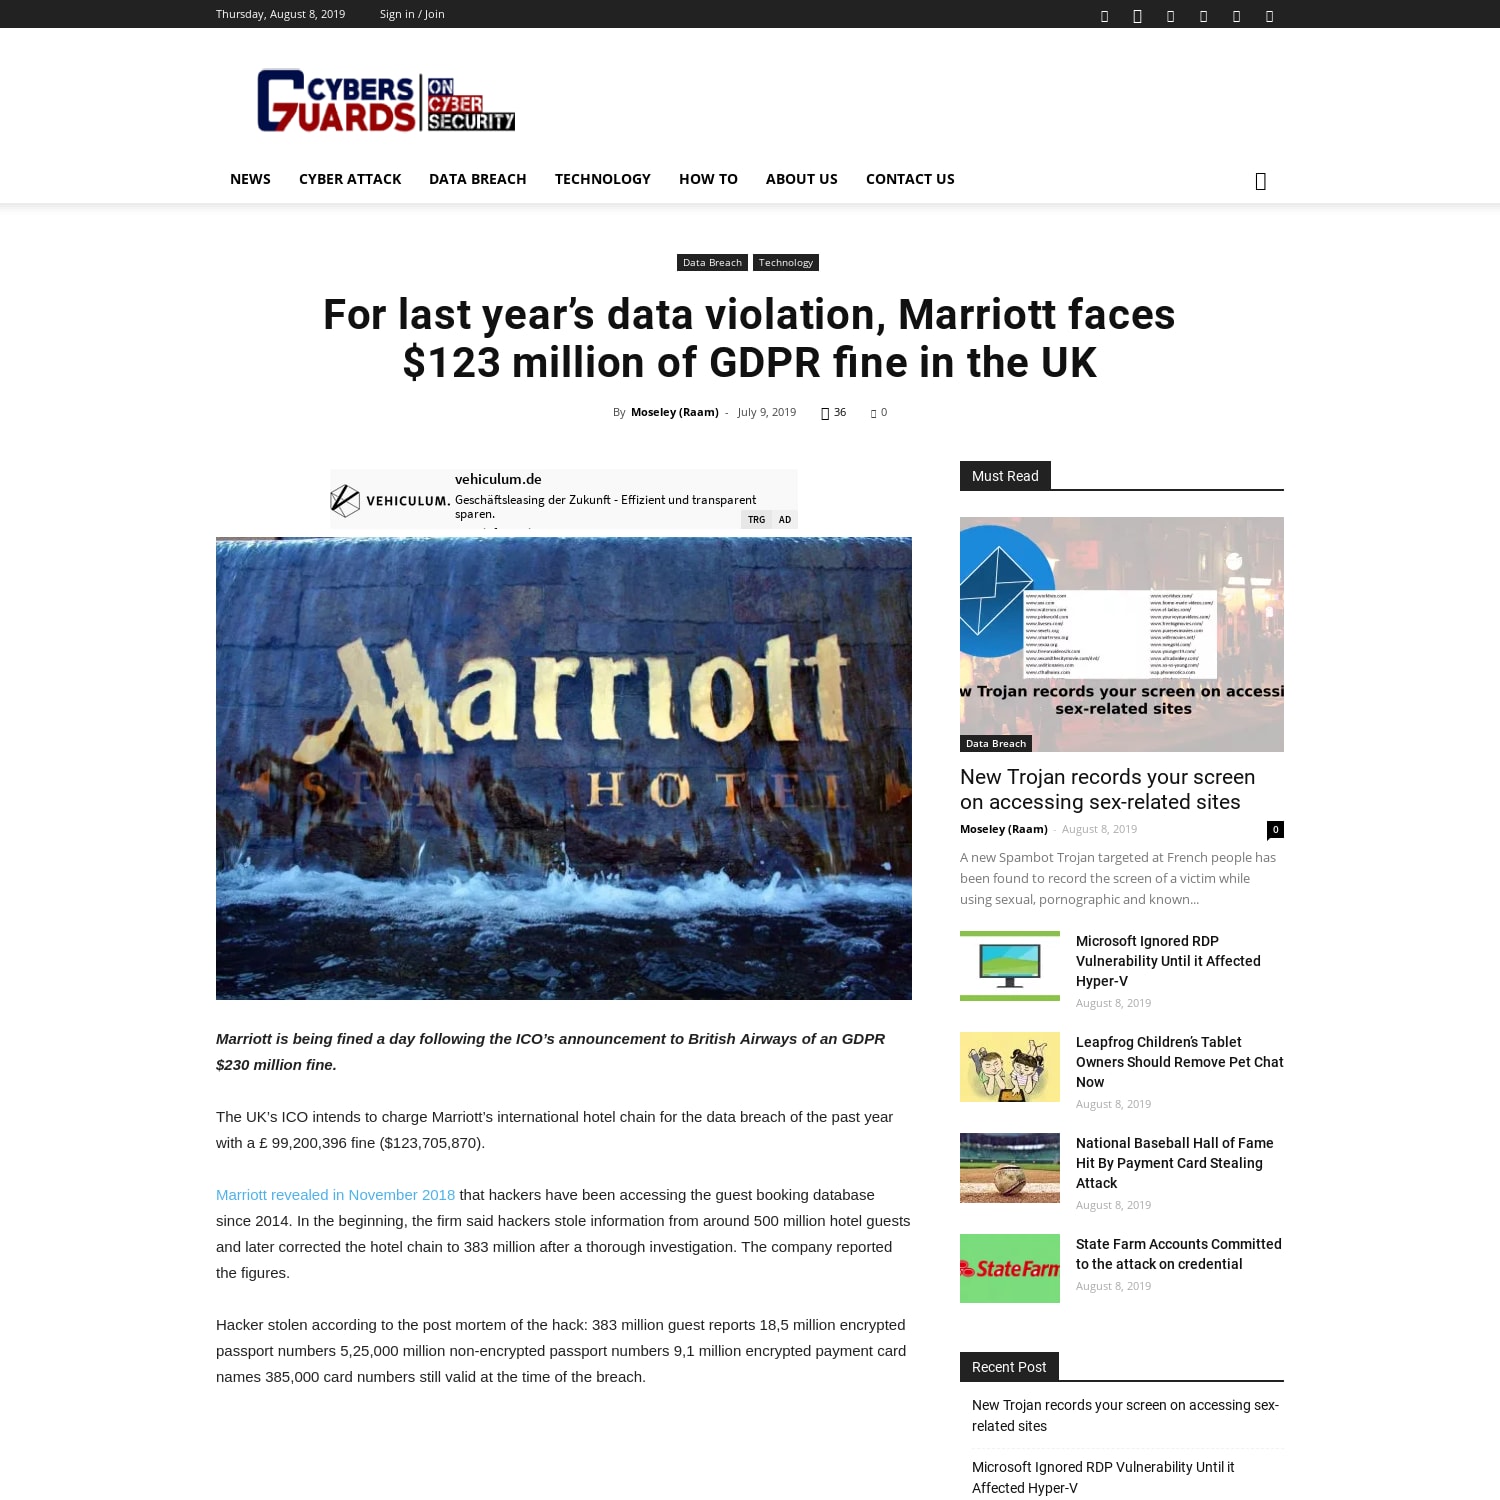 For last year's data violation, Marriott faces $123 million of GDPR fine in the UK